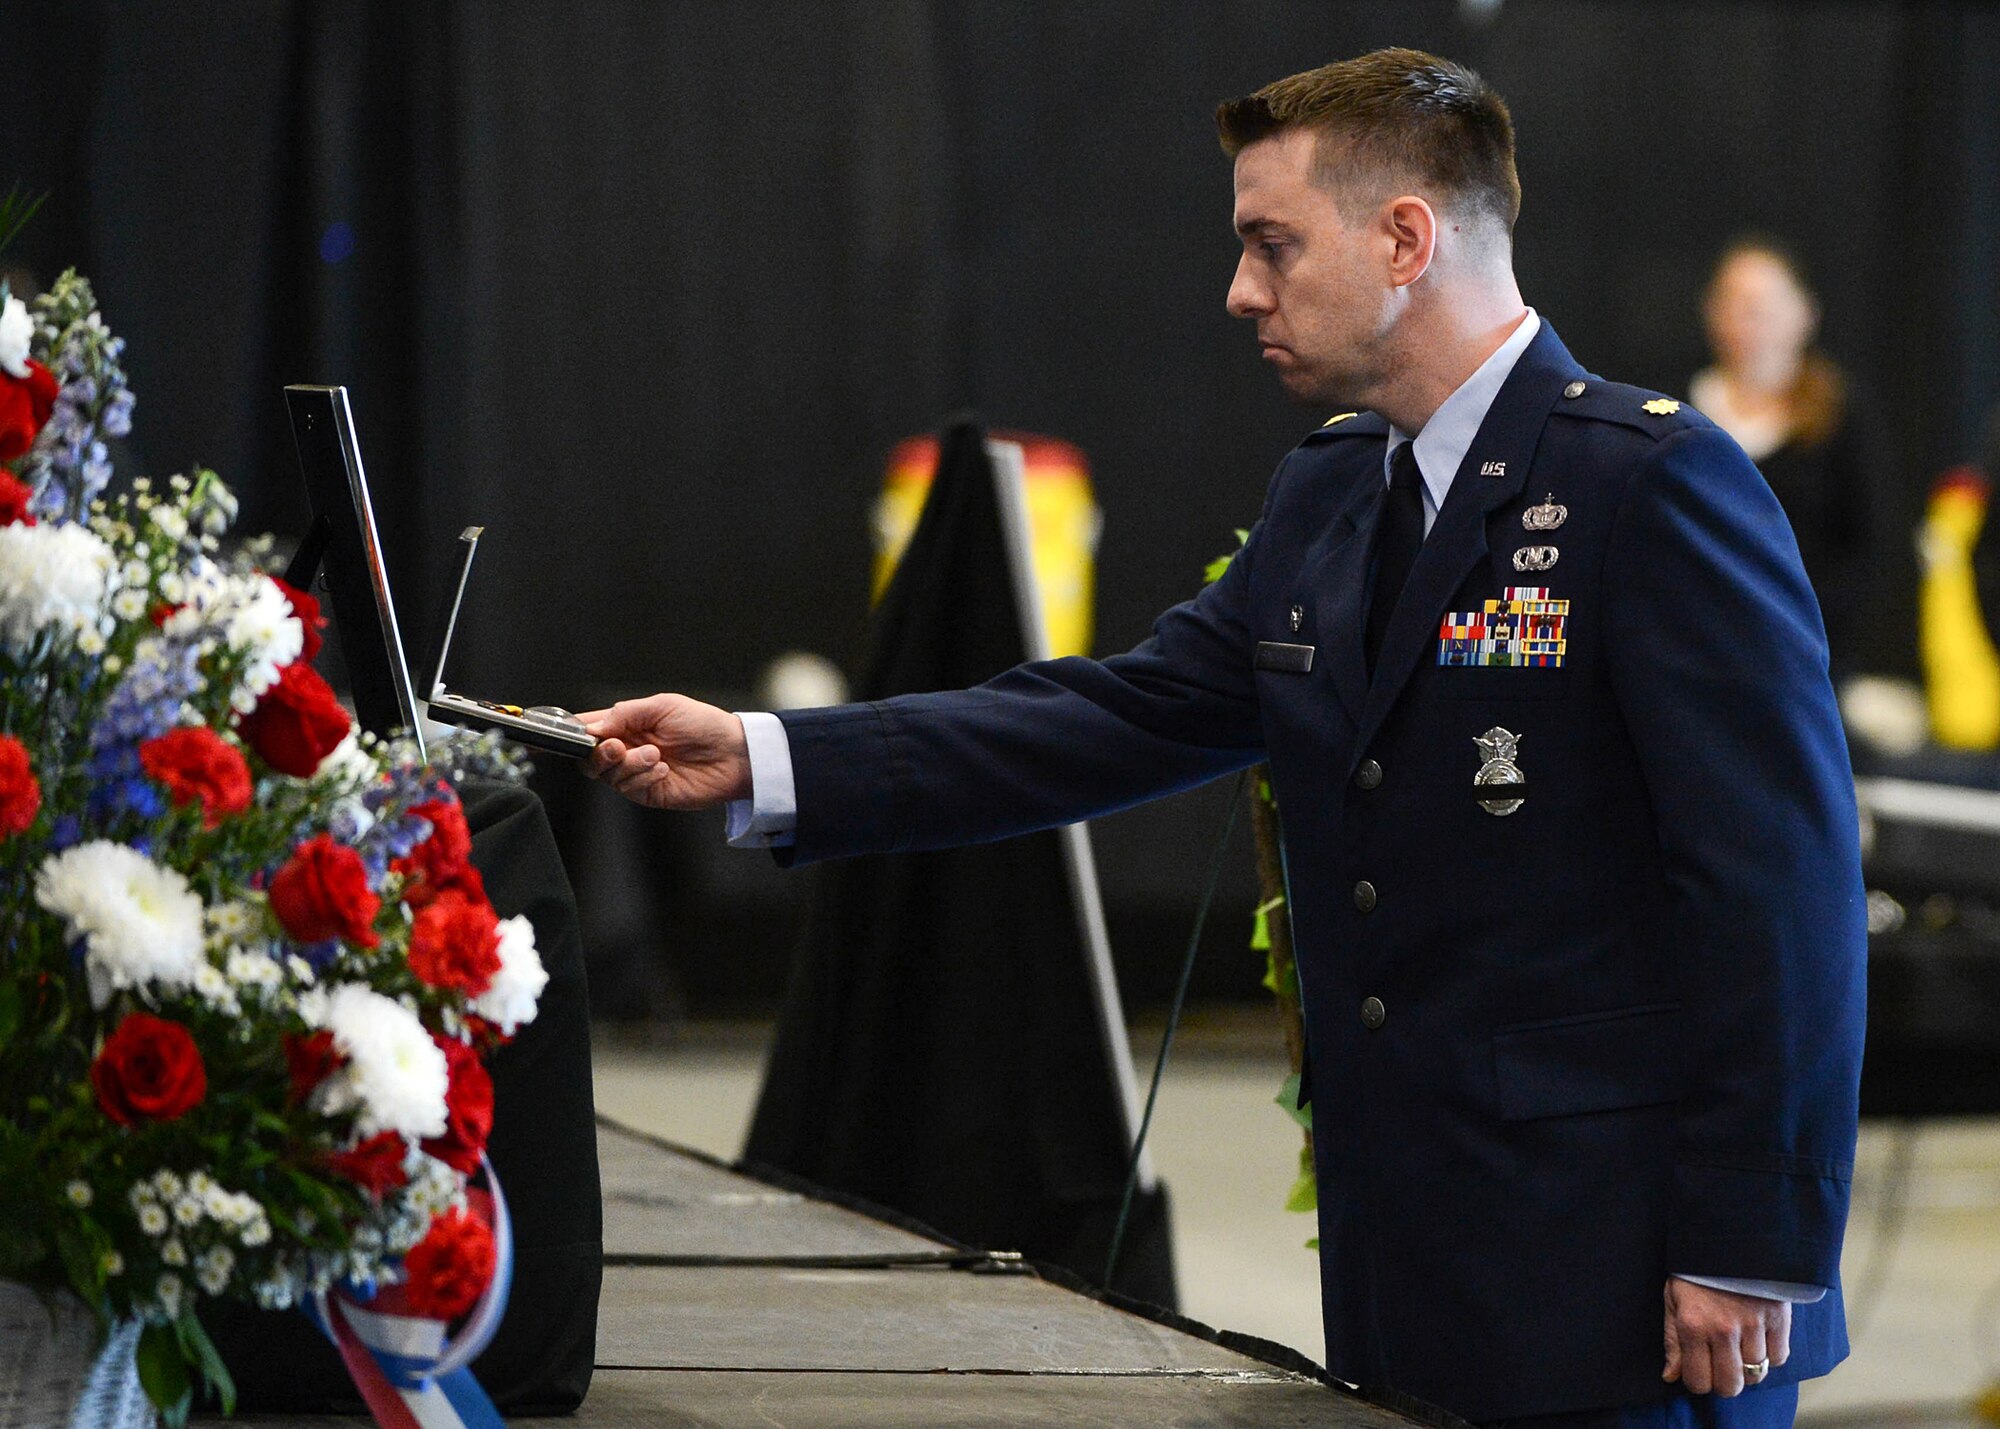 Maj. Joseph Bincarousky, 66th Security Forces Squadron commander, posthumously presents Senior Airman Nathan Sartain and Senior Airman Kcey Ruiz the Air Force Commendation Medal during a memorial service at the Aero Club Hangar Oct. 16. The service was held to honor and remember the two Airmen killed Oct. 2 when the C-130J Super Hercules aircraft they were on crashed shortly after take-off from Jalalabad, Afghanistan. (U.S. Air Force photo/Jerry Saslav)